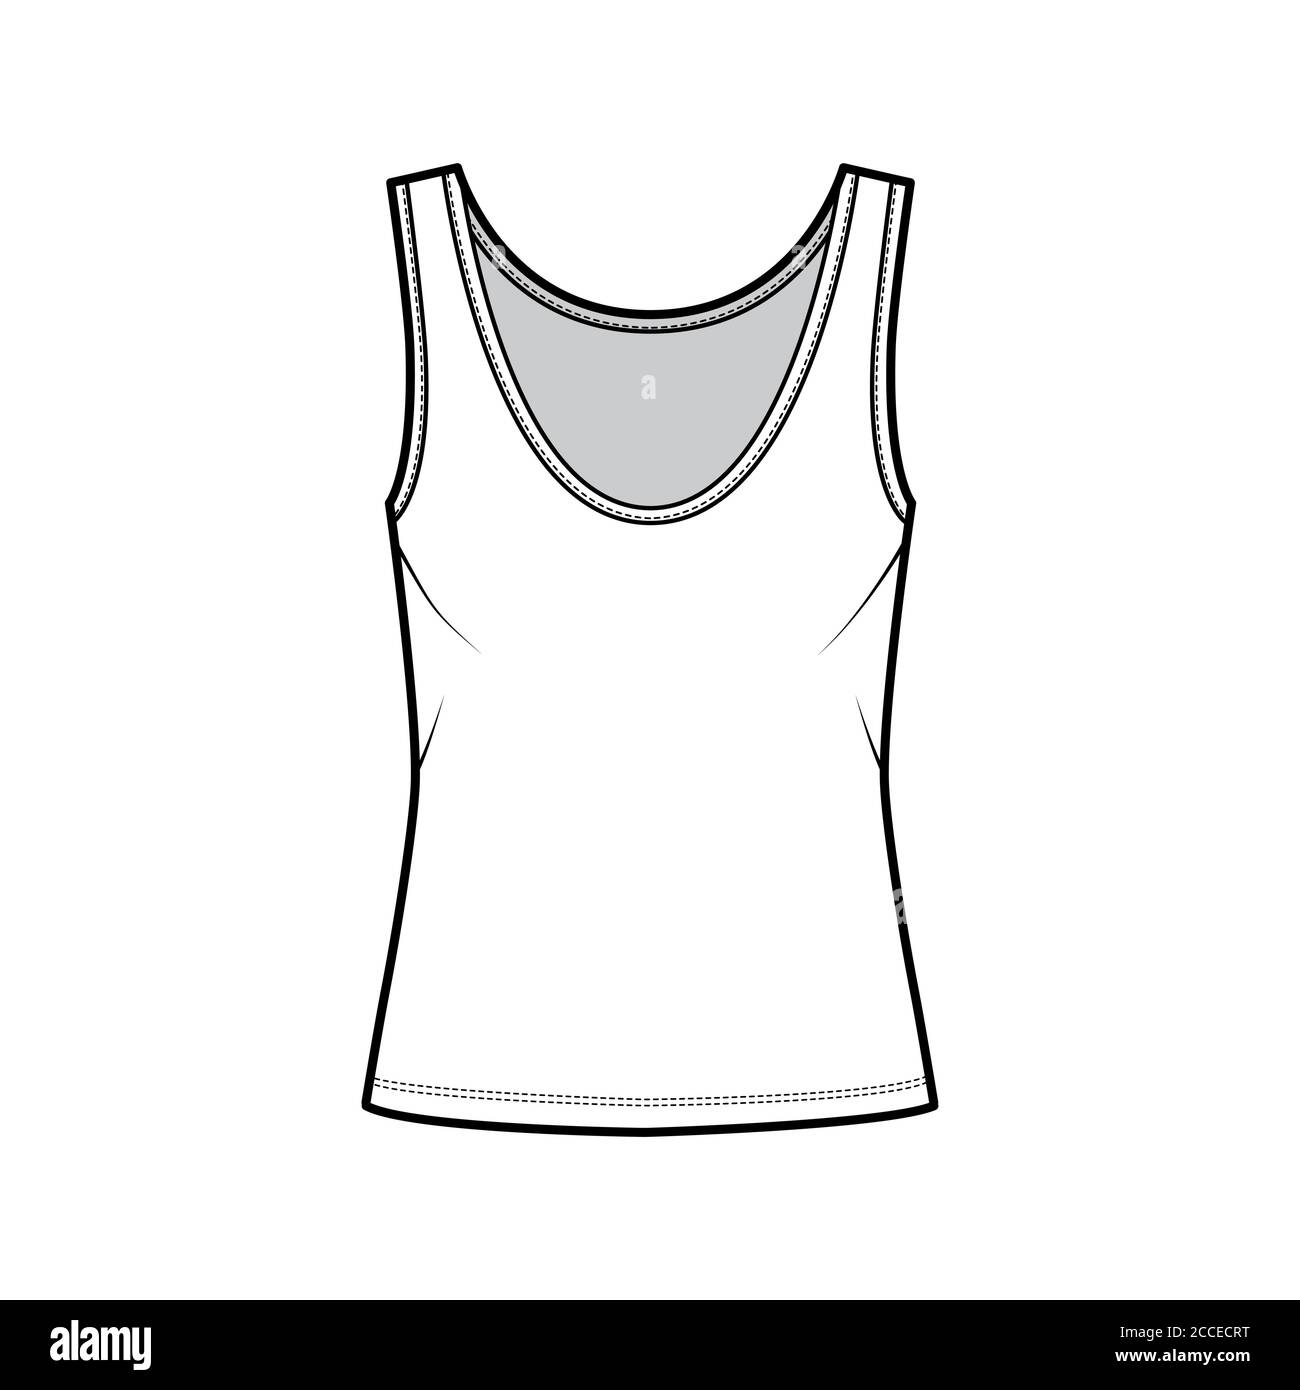 Cotton-jersey tank technical fashion illustration with fitted body